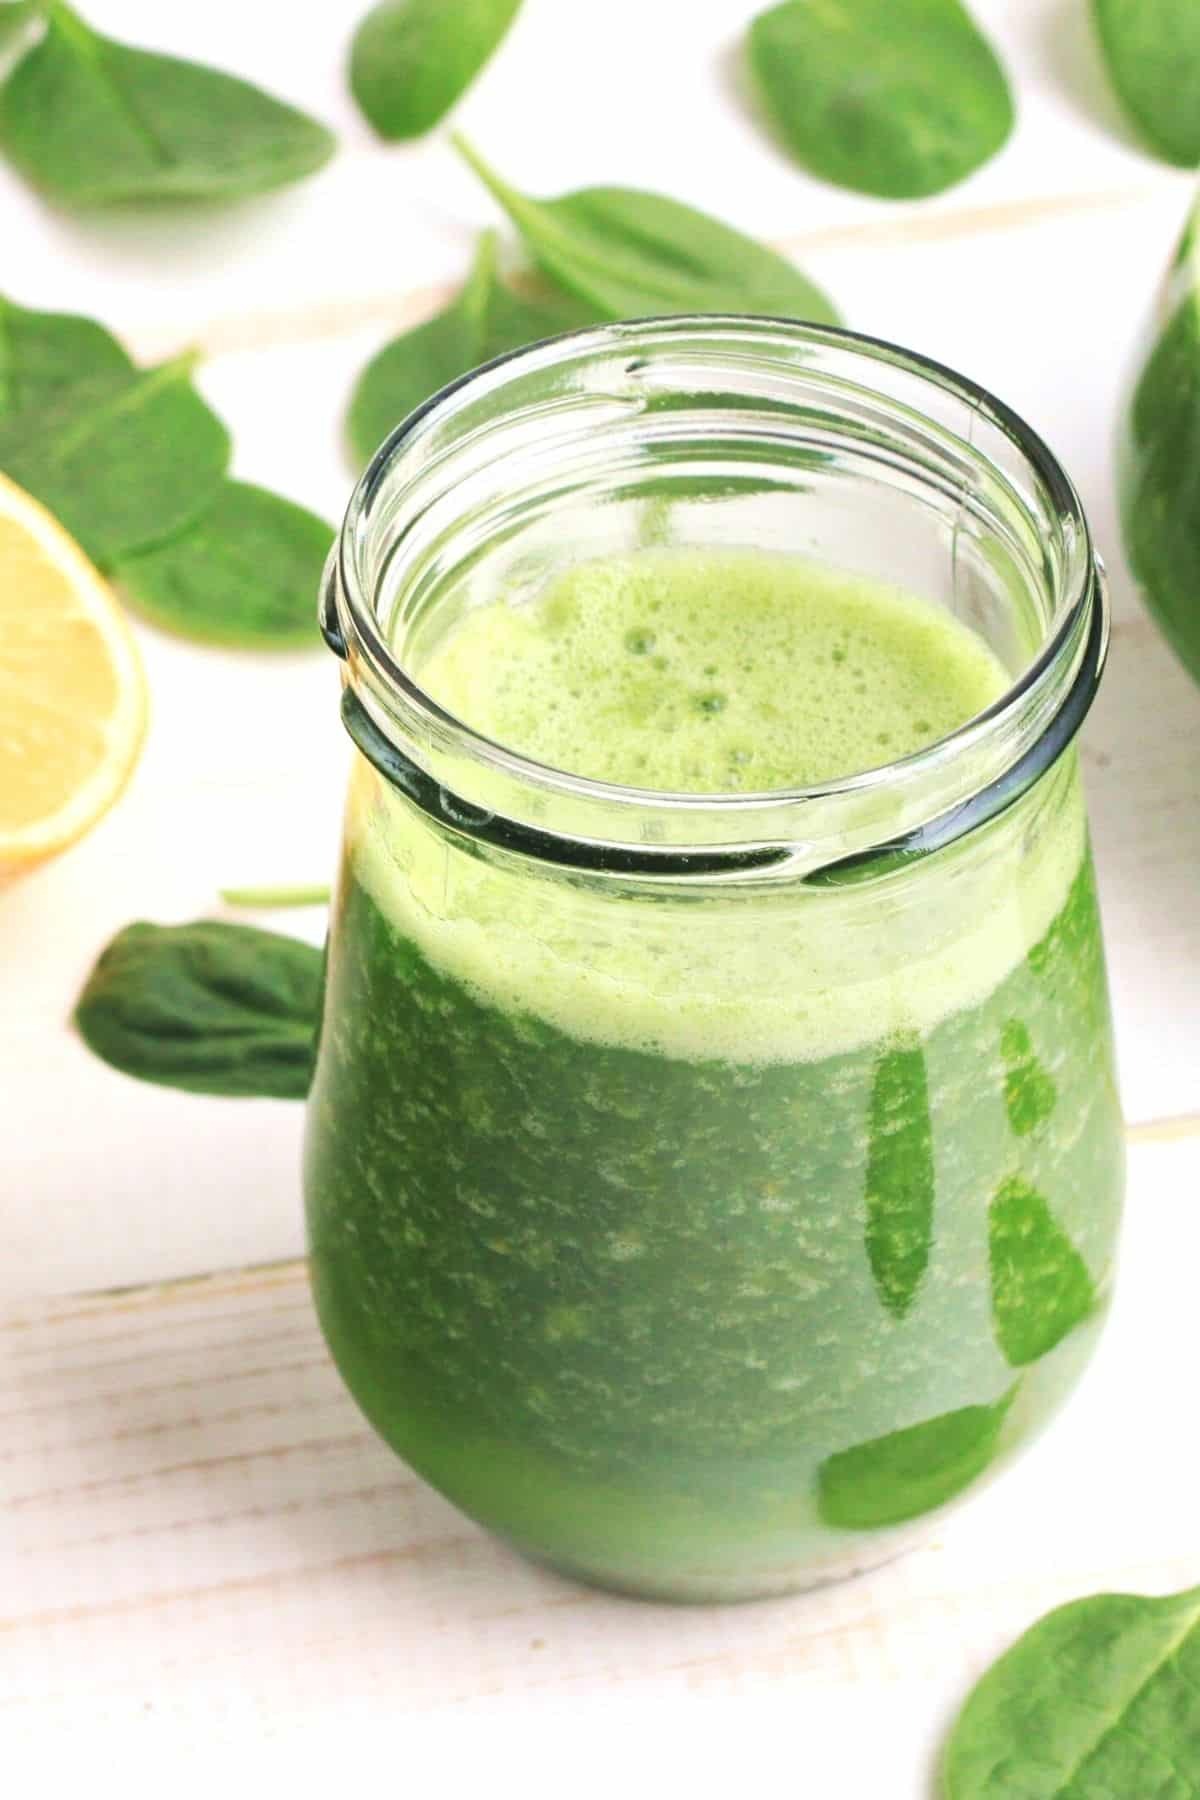 https://www.cleaneatingkitchen.com/wp-content/uploads/2021/06/vitamix-green-juice-with-spinach-and-lemon.jpg